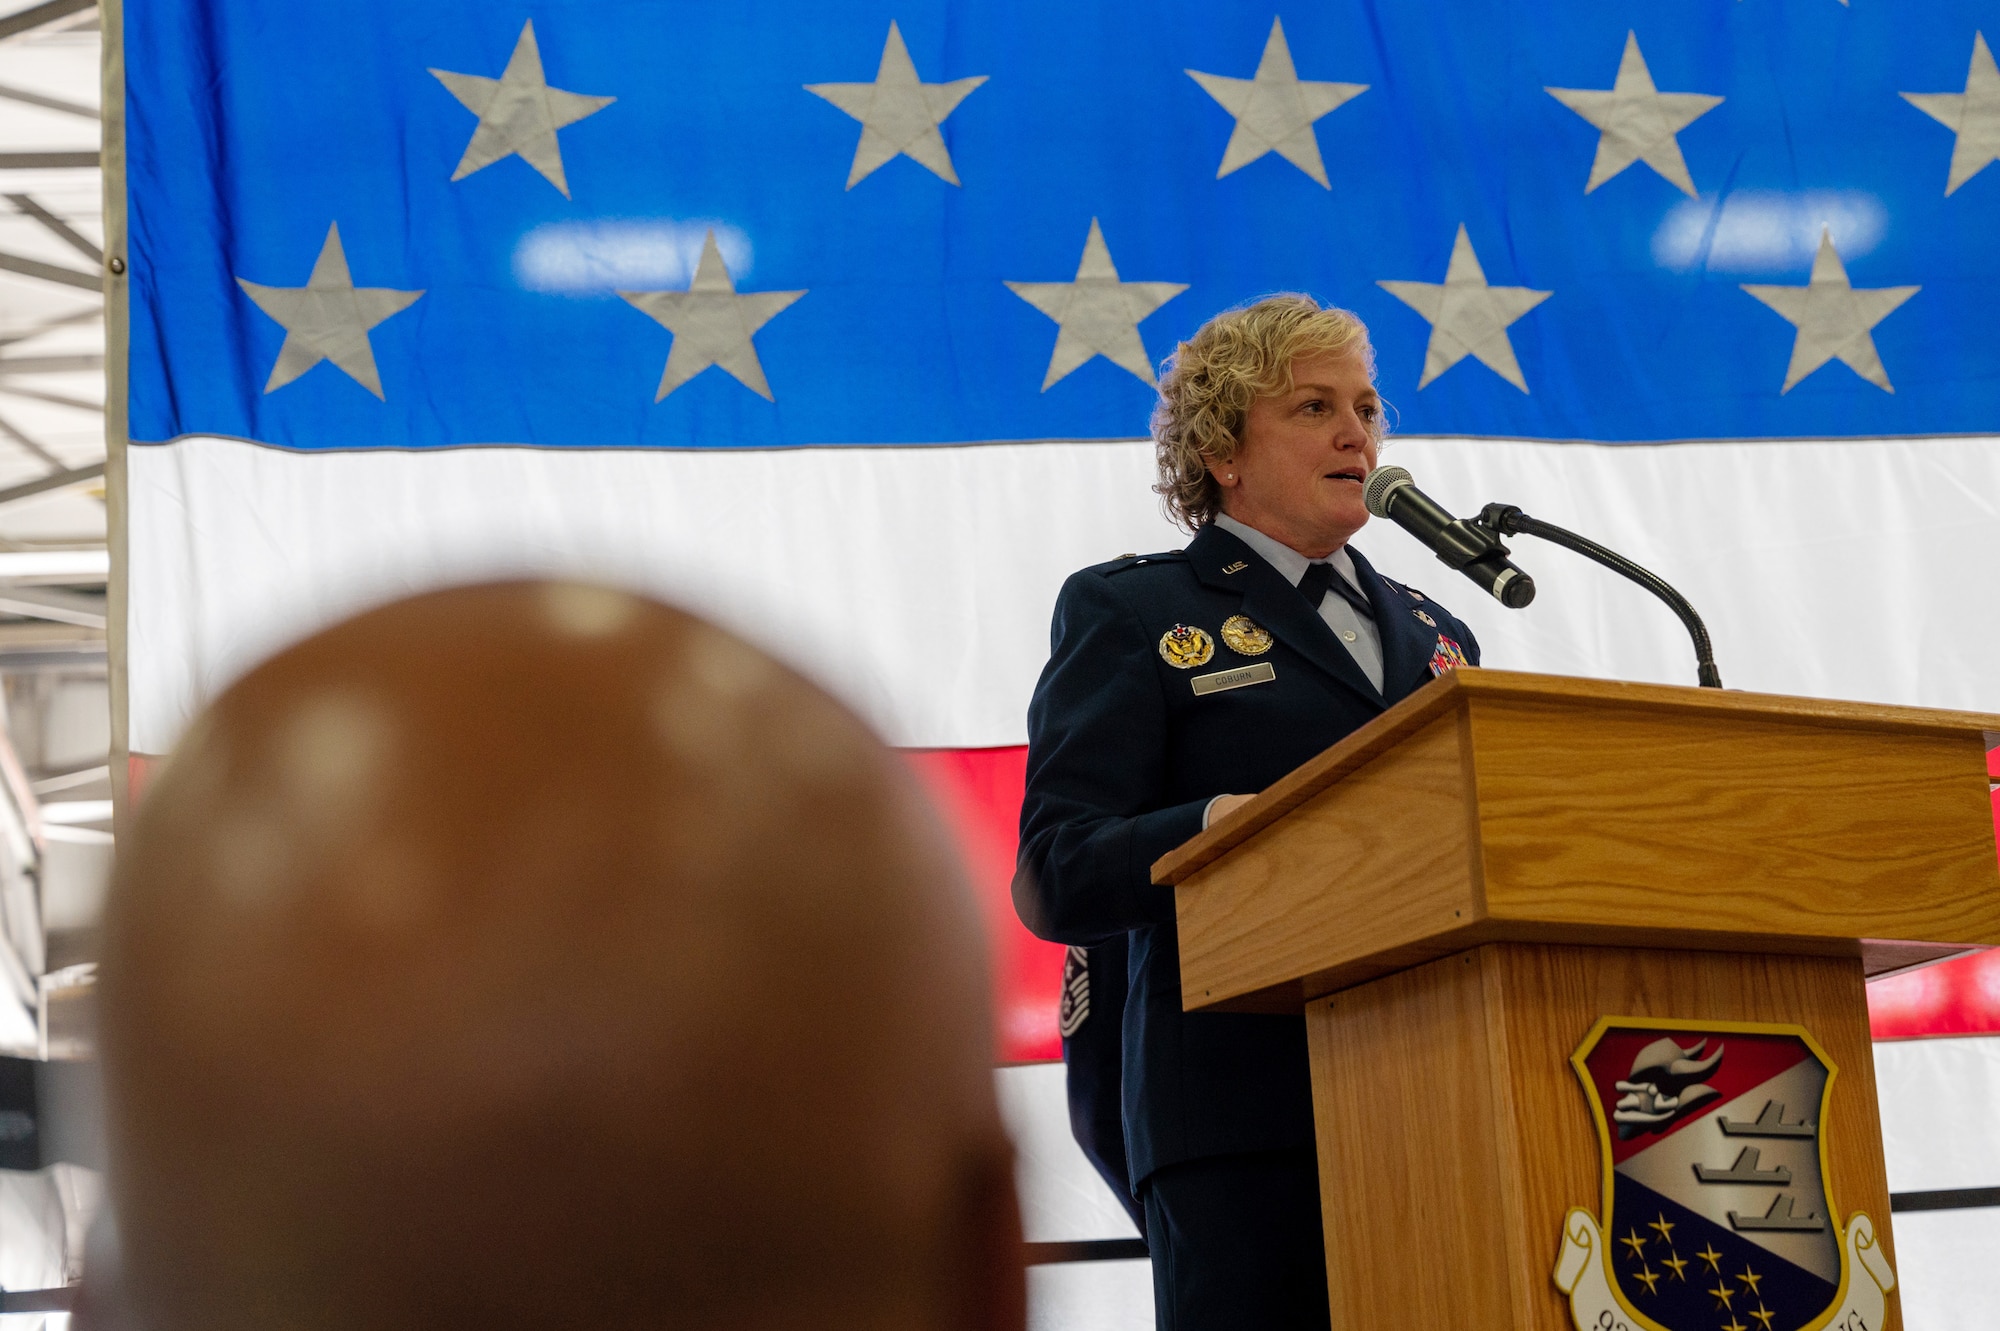 Brig. Gen. Melissa Coburn, the 22nd Air Force commander, speaks to the audience during a 934th Airlift Wing assumption of command ceremony for Col. Samuel Kraemer at the Minneapolis-St. Paul Air Reserve Station, Minnesota, Nov. 5, 2023. Before assuming the command of the 934 AW, Kraemer was the commander of 934th Operations Group. (U.S. Air Force photo by Senior Airman Matthew Reisdorf)